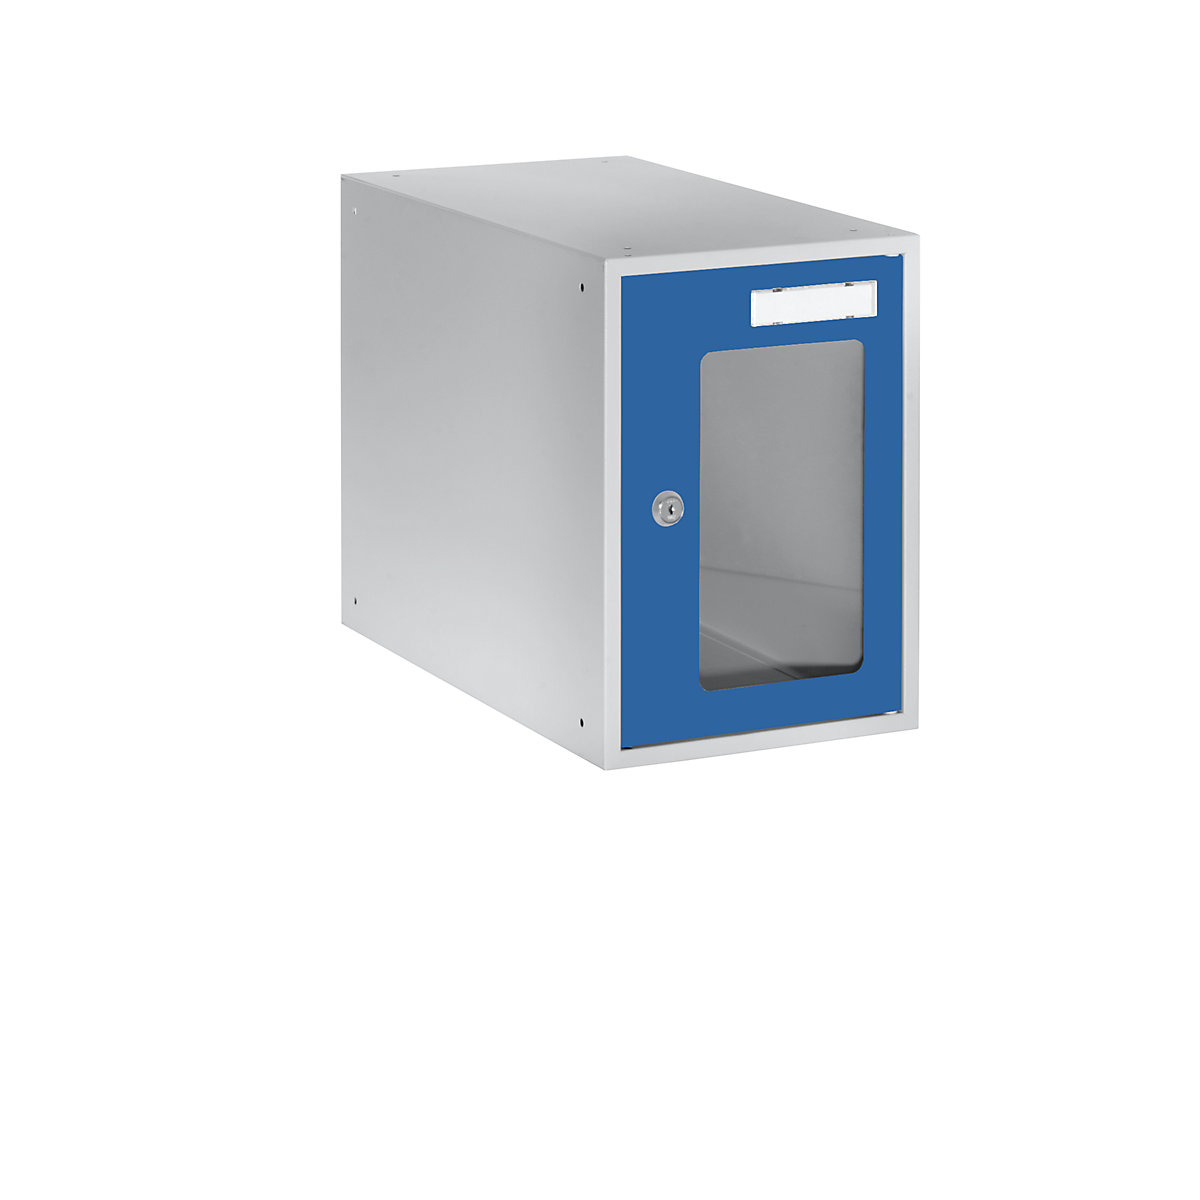 Cube lockers with vision panel – eurokraft basic, HxWxD 350 x 250 x 450 mm, door frame gentian blue RAL 5010-3